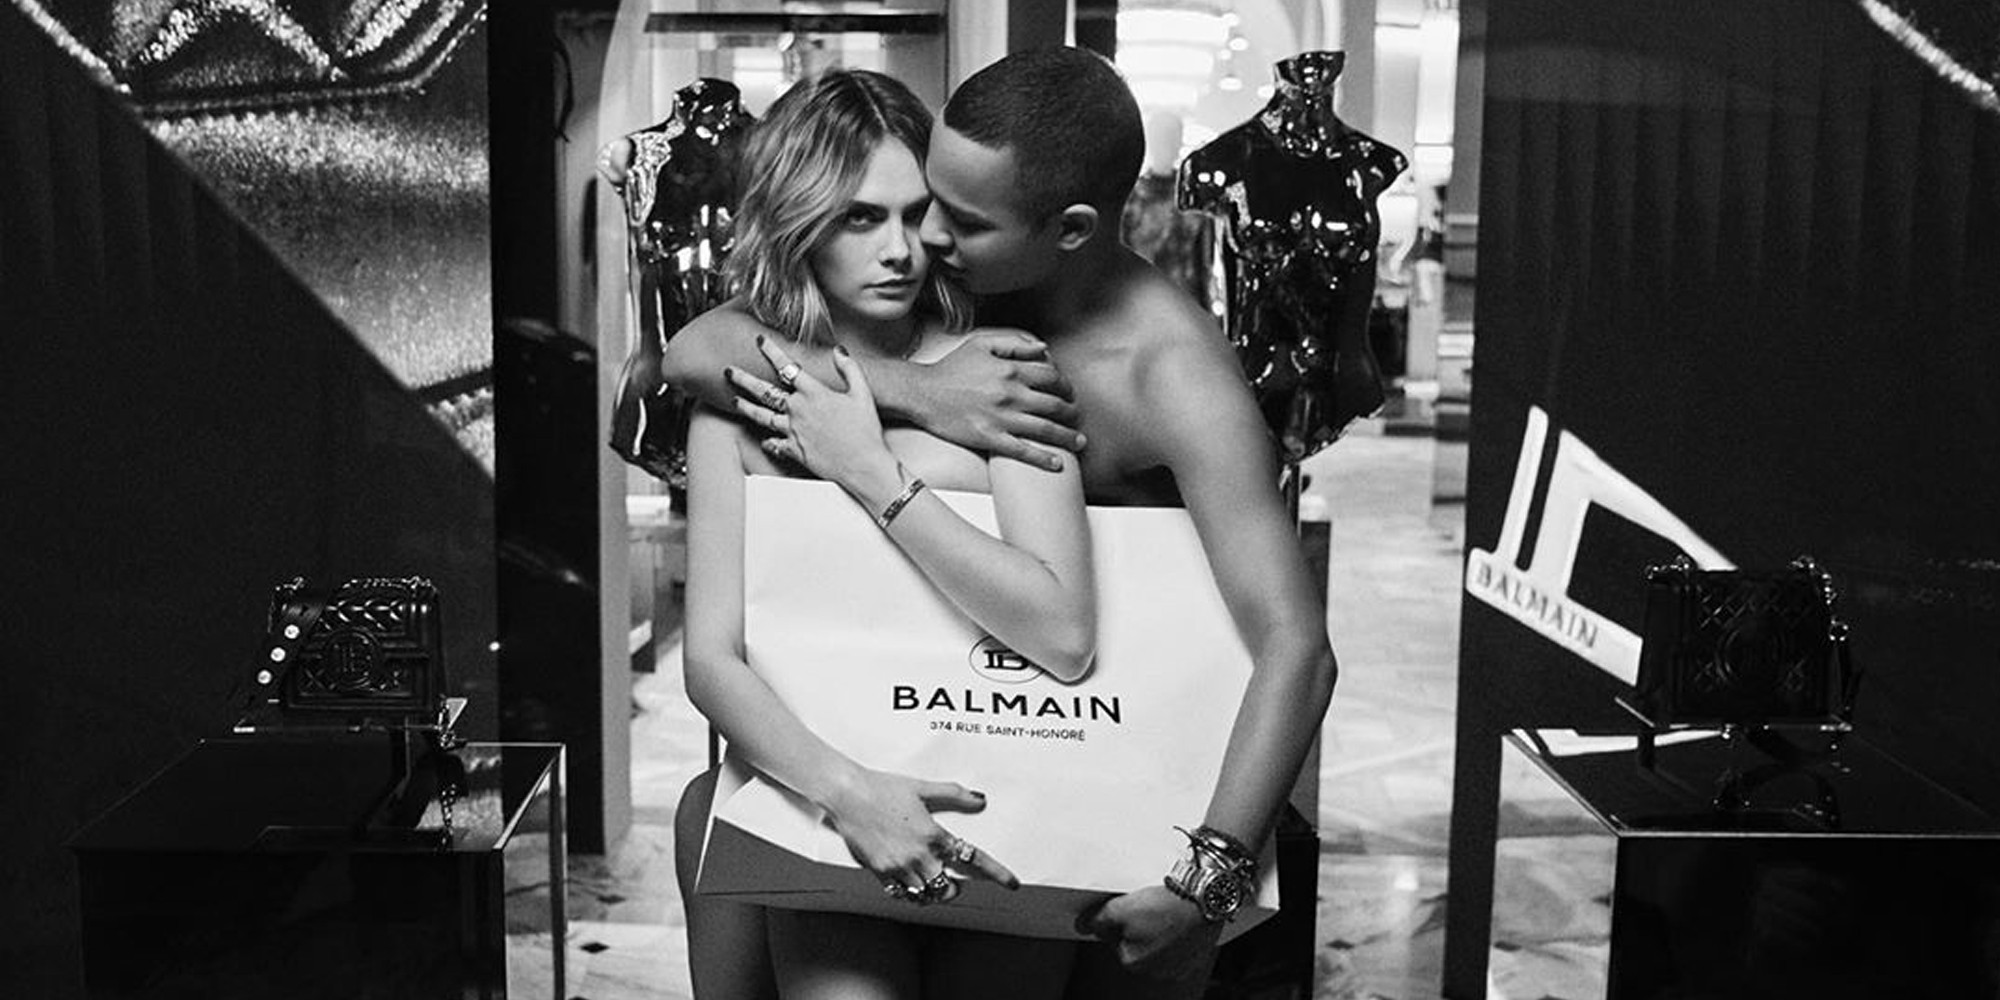 Balmain 'Truth or dare' film starring cara delevingne and olivier...